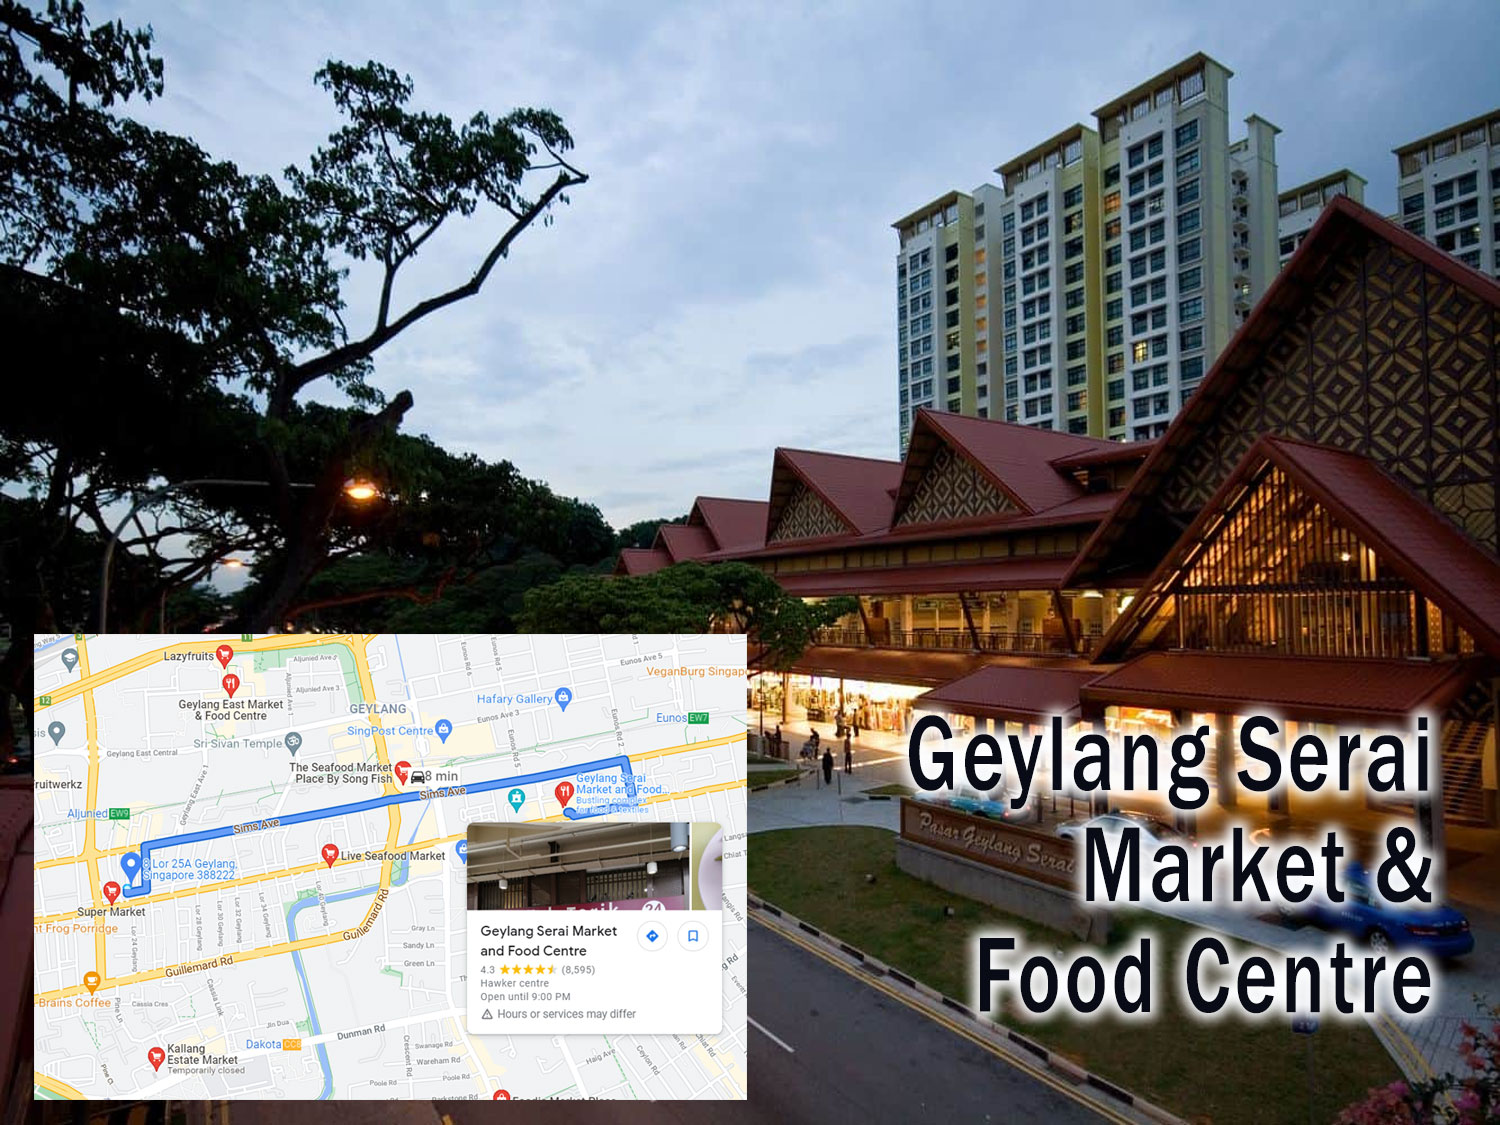 Approximately 8 minutes drive from Zyanya Condo to Geylang Serai Market and Food Center